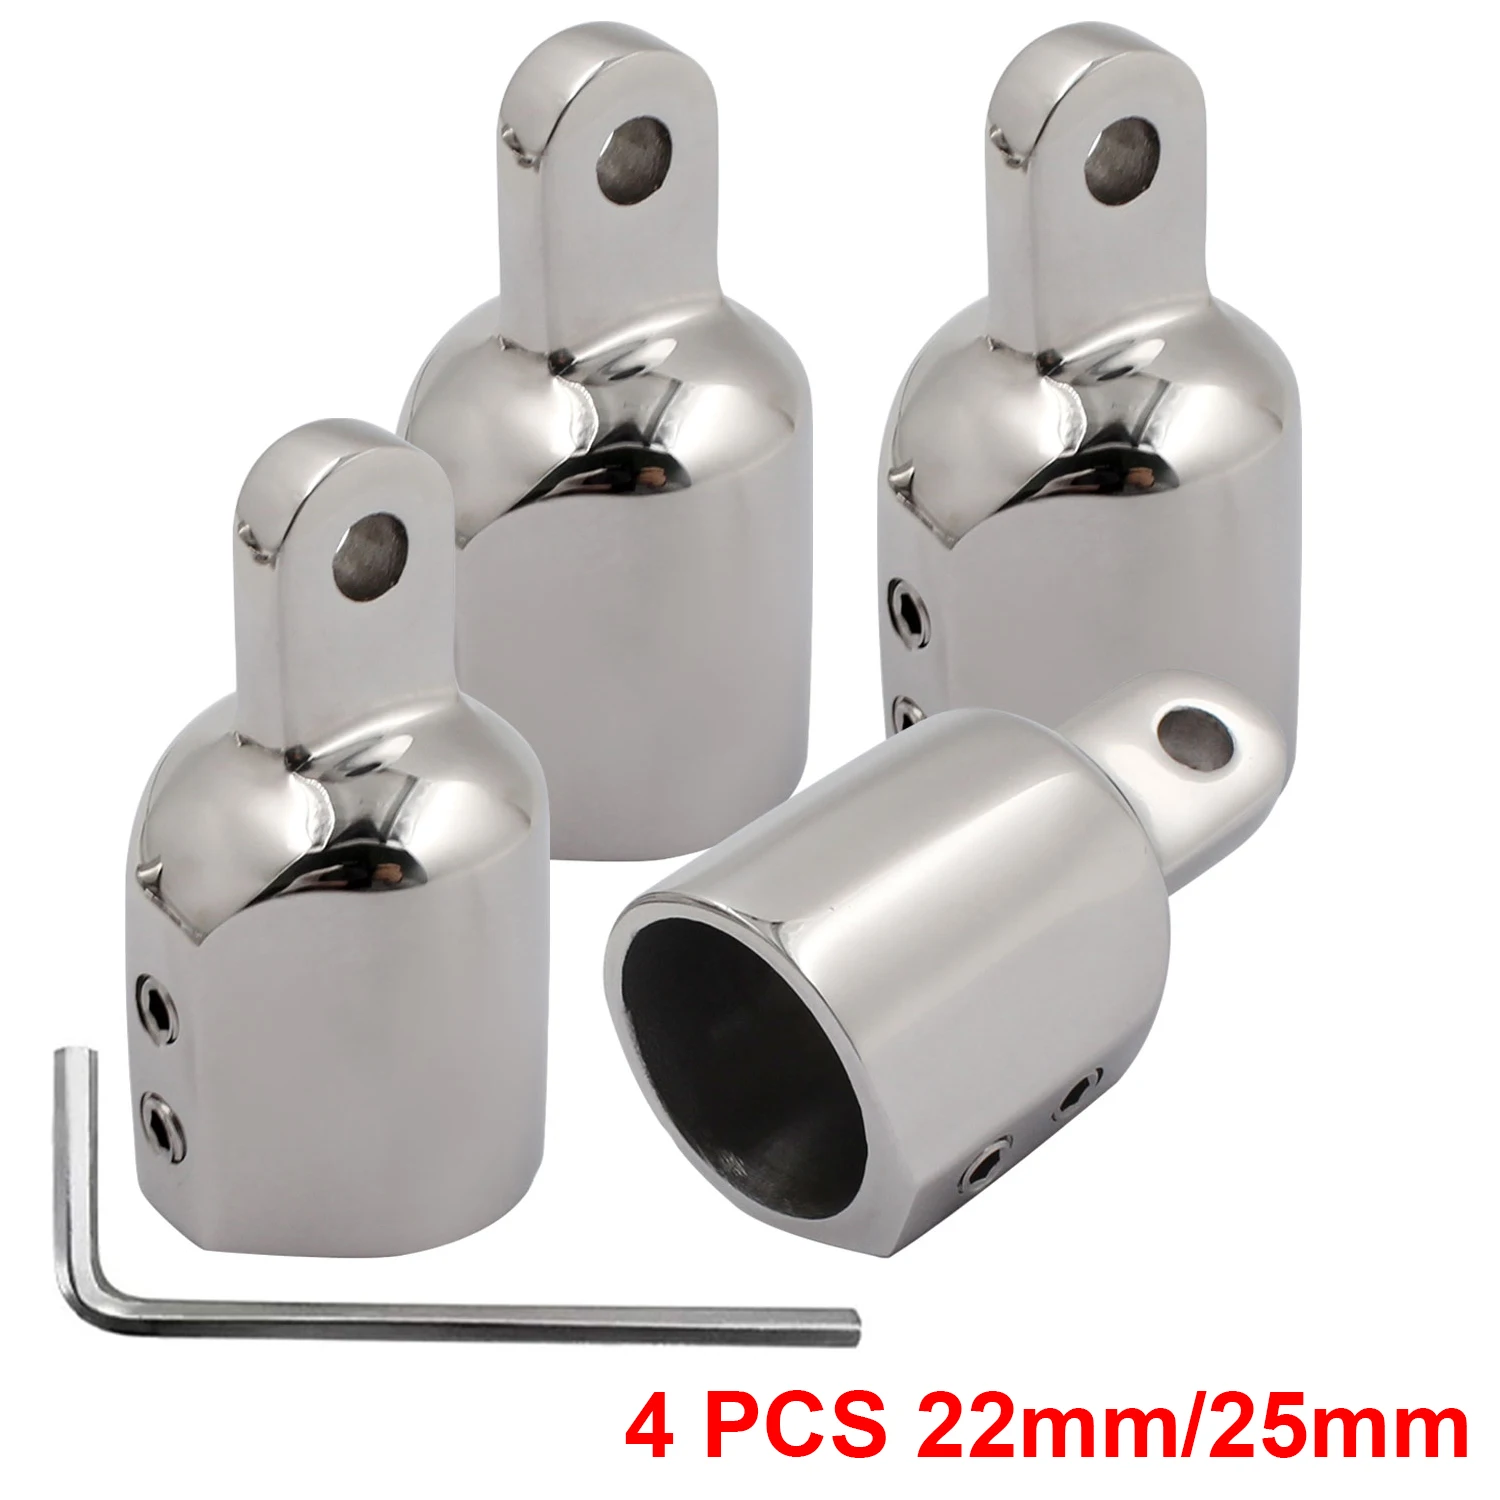 4 Pack 22mm/25mm Heavy Duty Bimini Top Cap Eye End Fitting Stainless Steel 316 Marine Hardware Boat External Eye End 1pc boat bimini top swivel deck hinge marine 316 stainless steel with rubber pad for yachts car trailer canopy hardware fitting